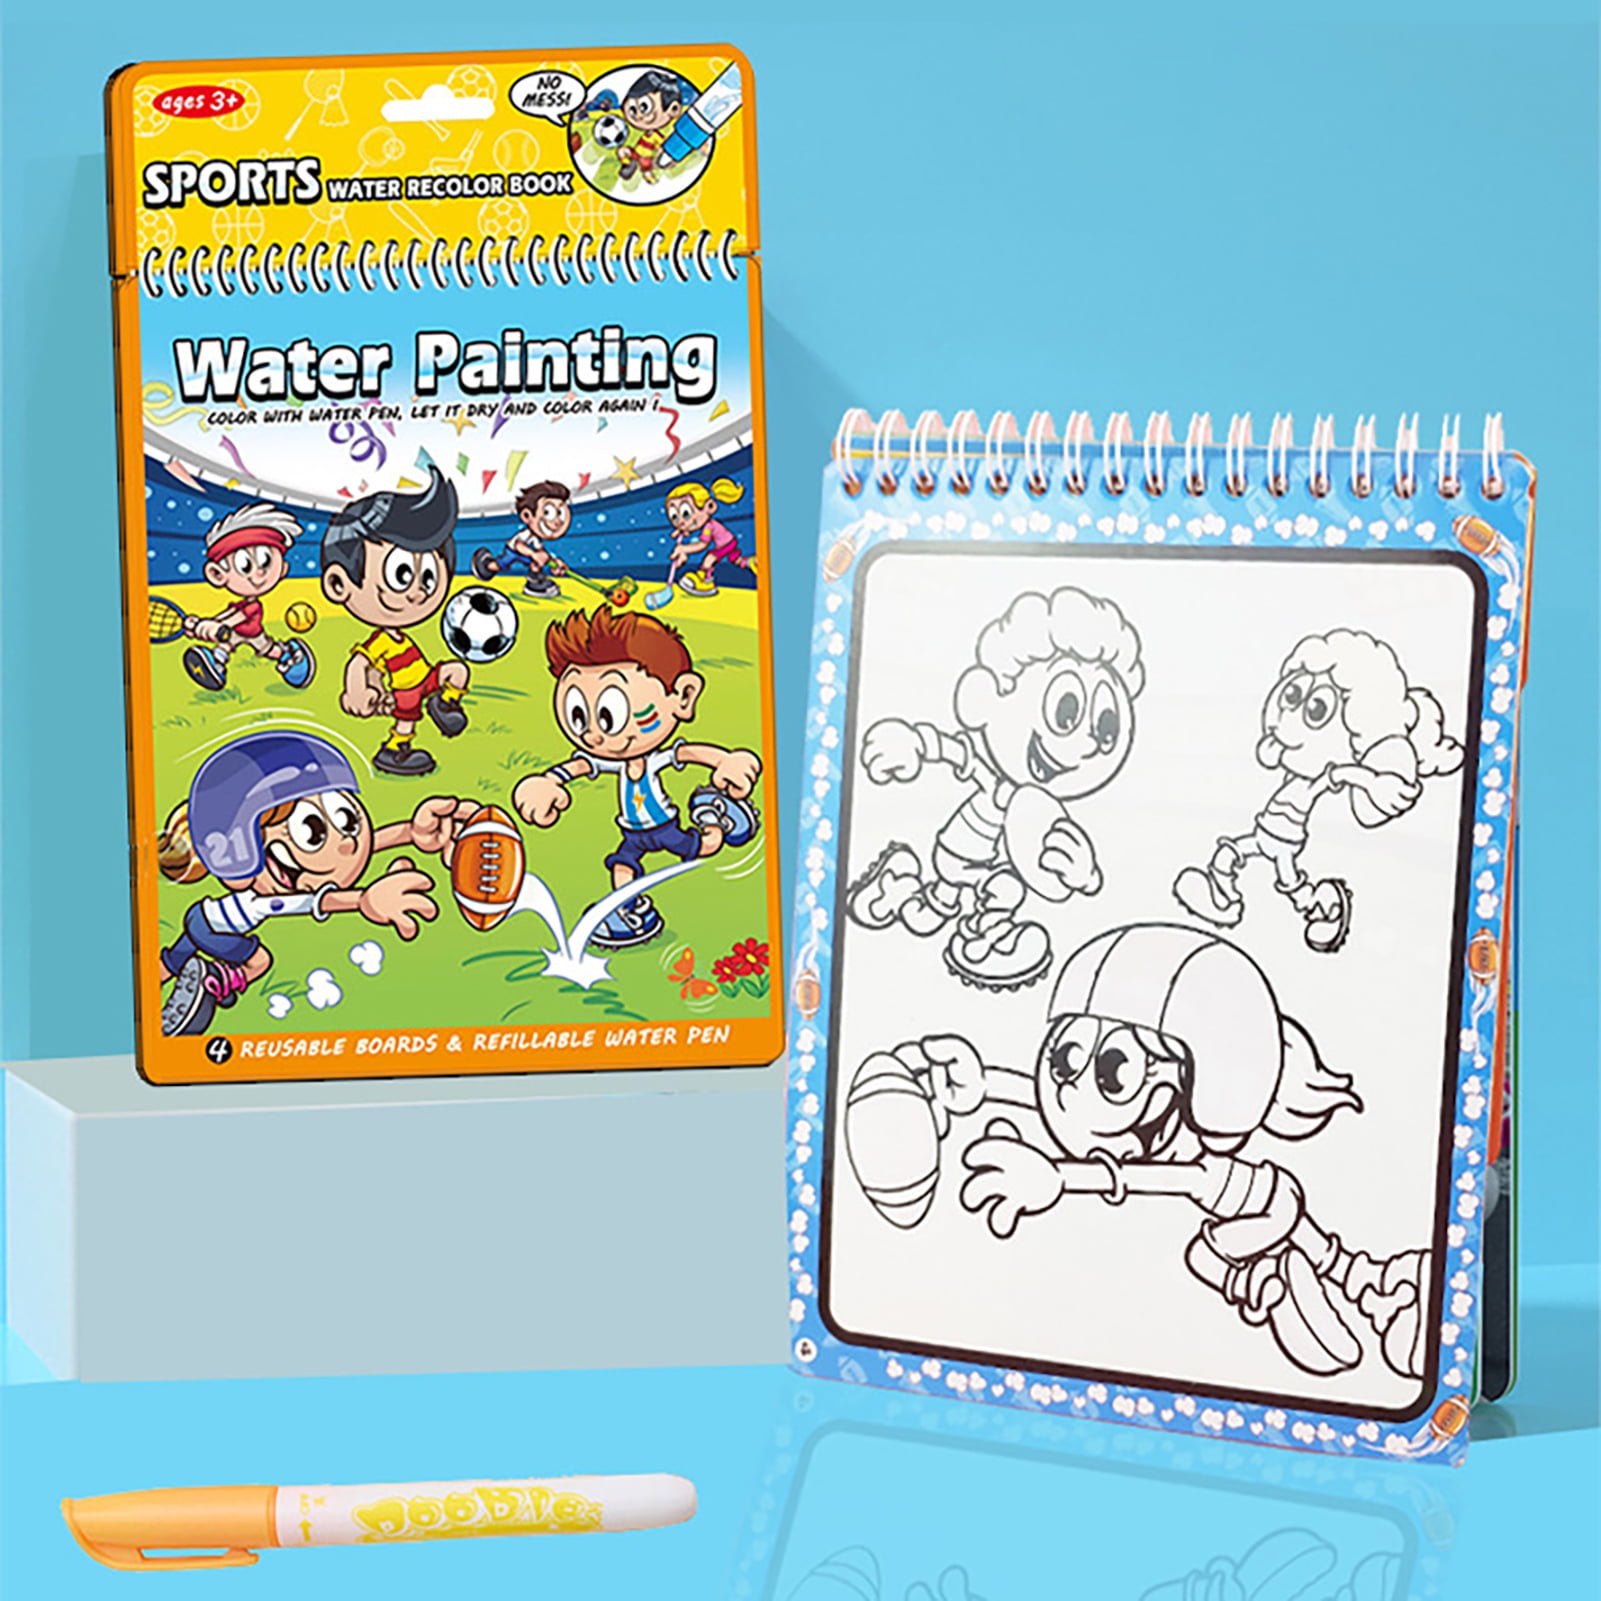 keusn water coloring book reusable painting cartoon animal book mess  drawing painting books for toddlers boys girls educational learning gifts 